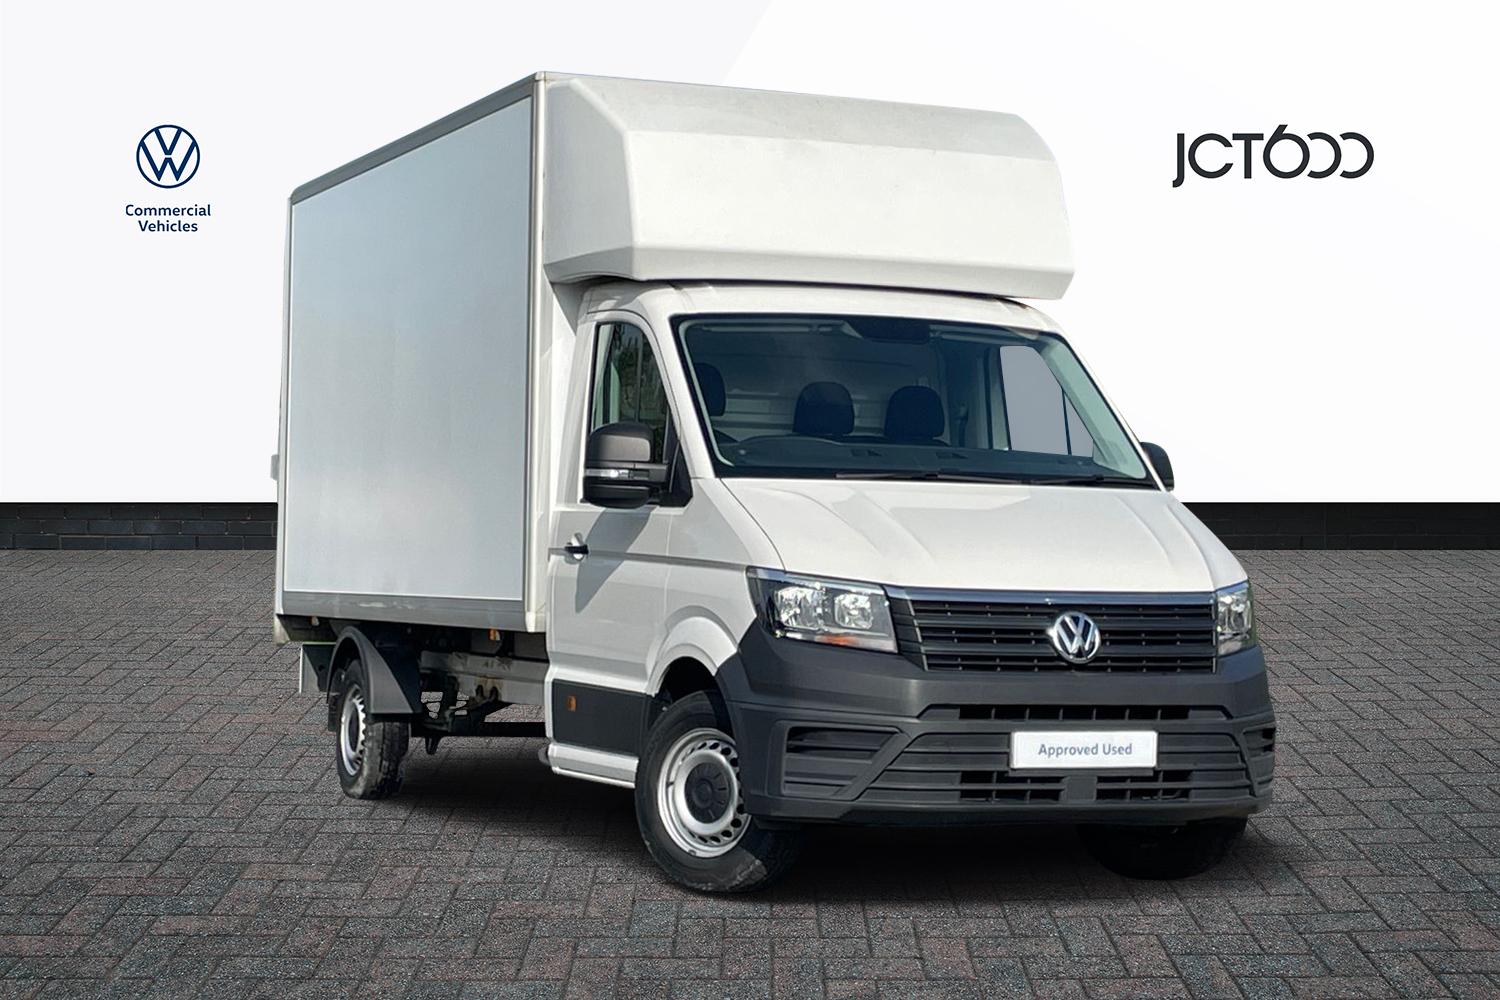 VW Crafter, Commercial Transport Vehicle